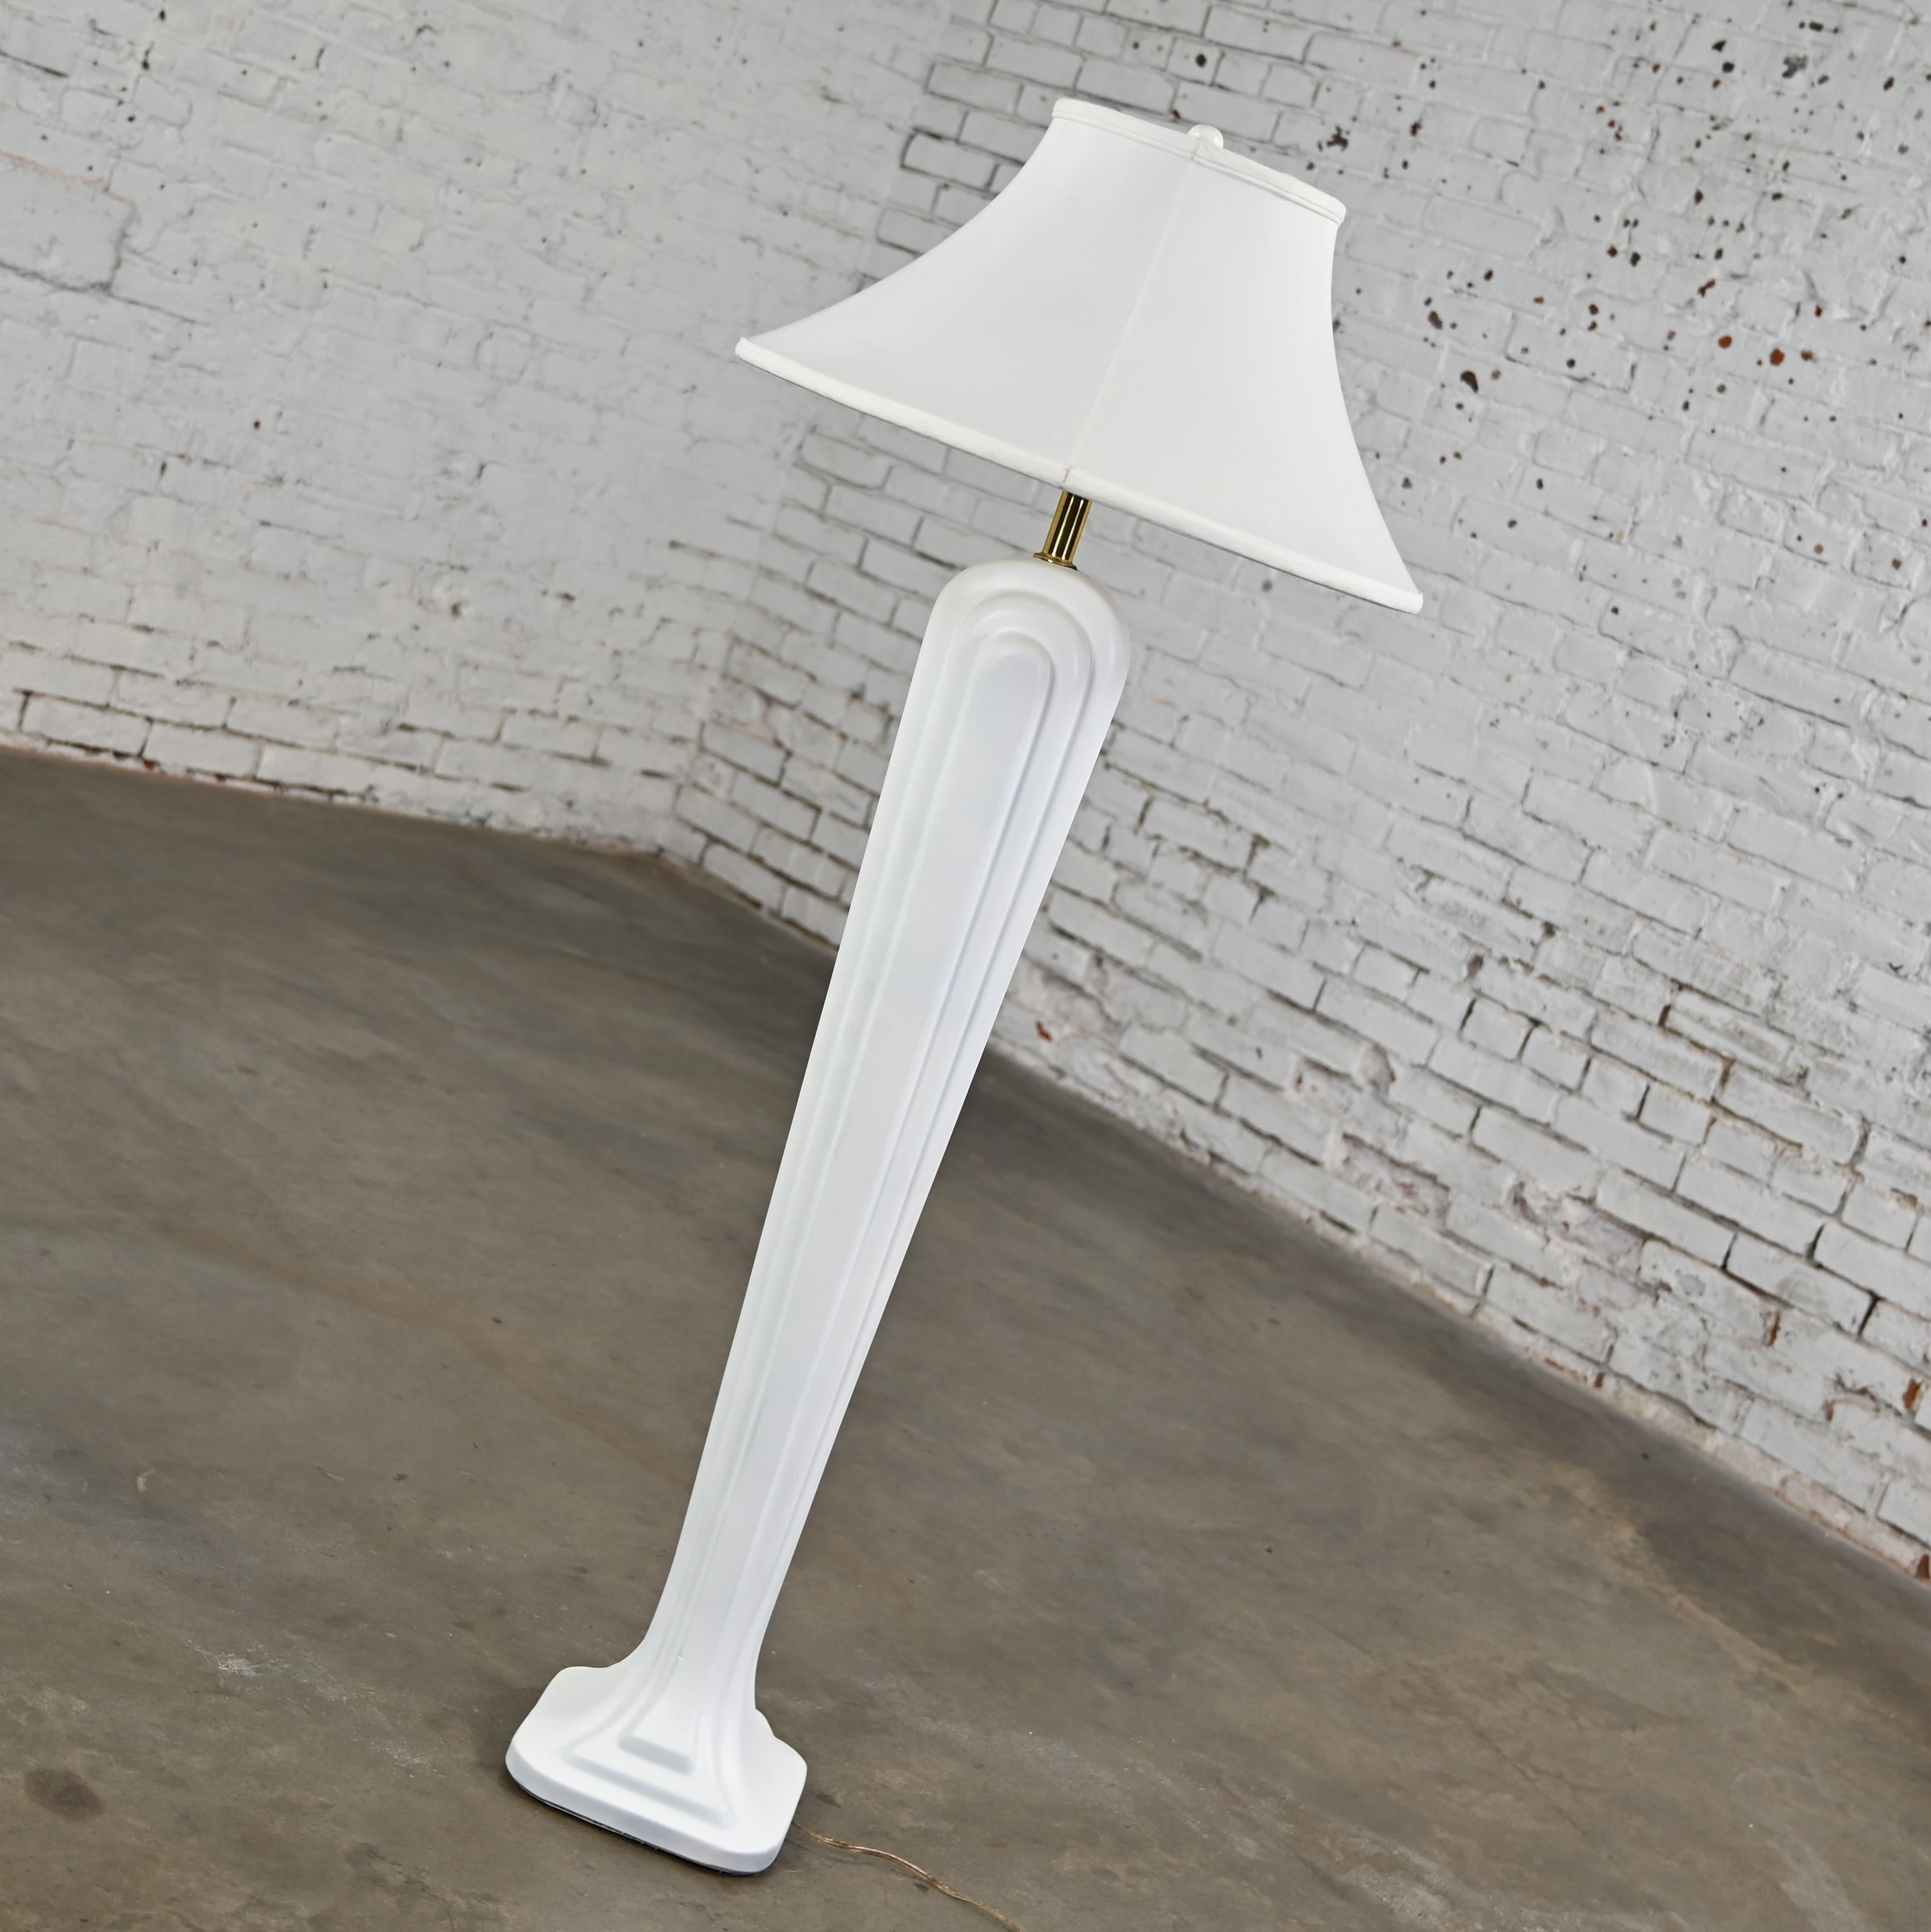 Art Deco Revival to Postmodern Paolo Gucci Floor Lamp White Sculpted Resin  In Good Condition For Sale In Topeka, KS